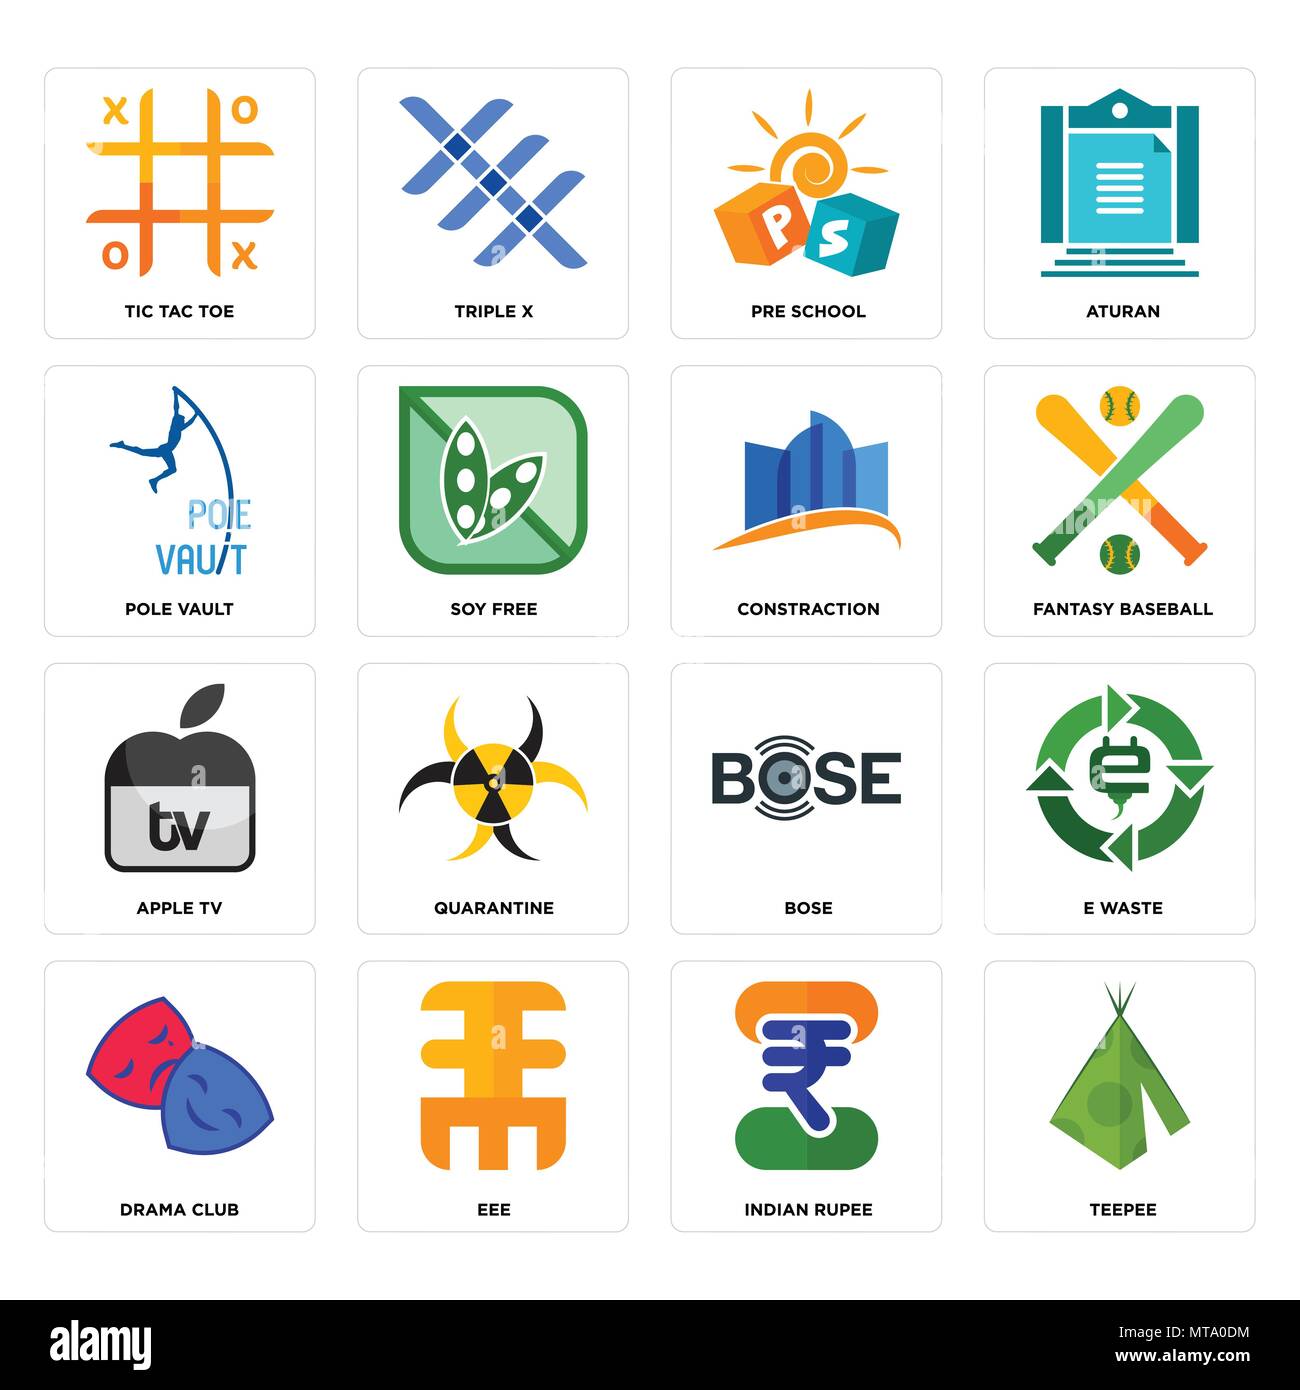 Set Of 16 simple editable icons such as teepee, indian rupee, eee, drama club, e waste, tic tac toe, pole vault, apple tv, constraction can be used fo Stock Vector